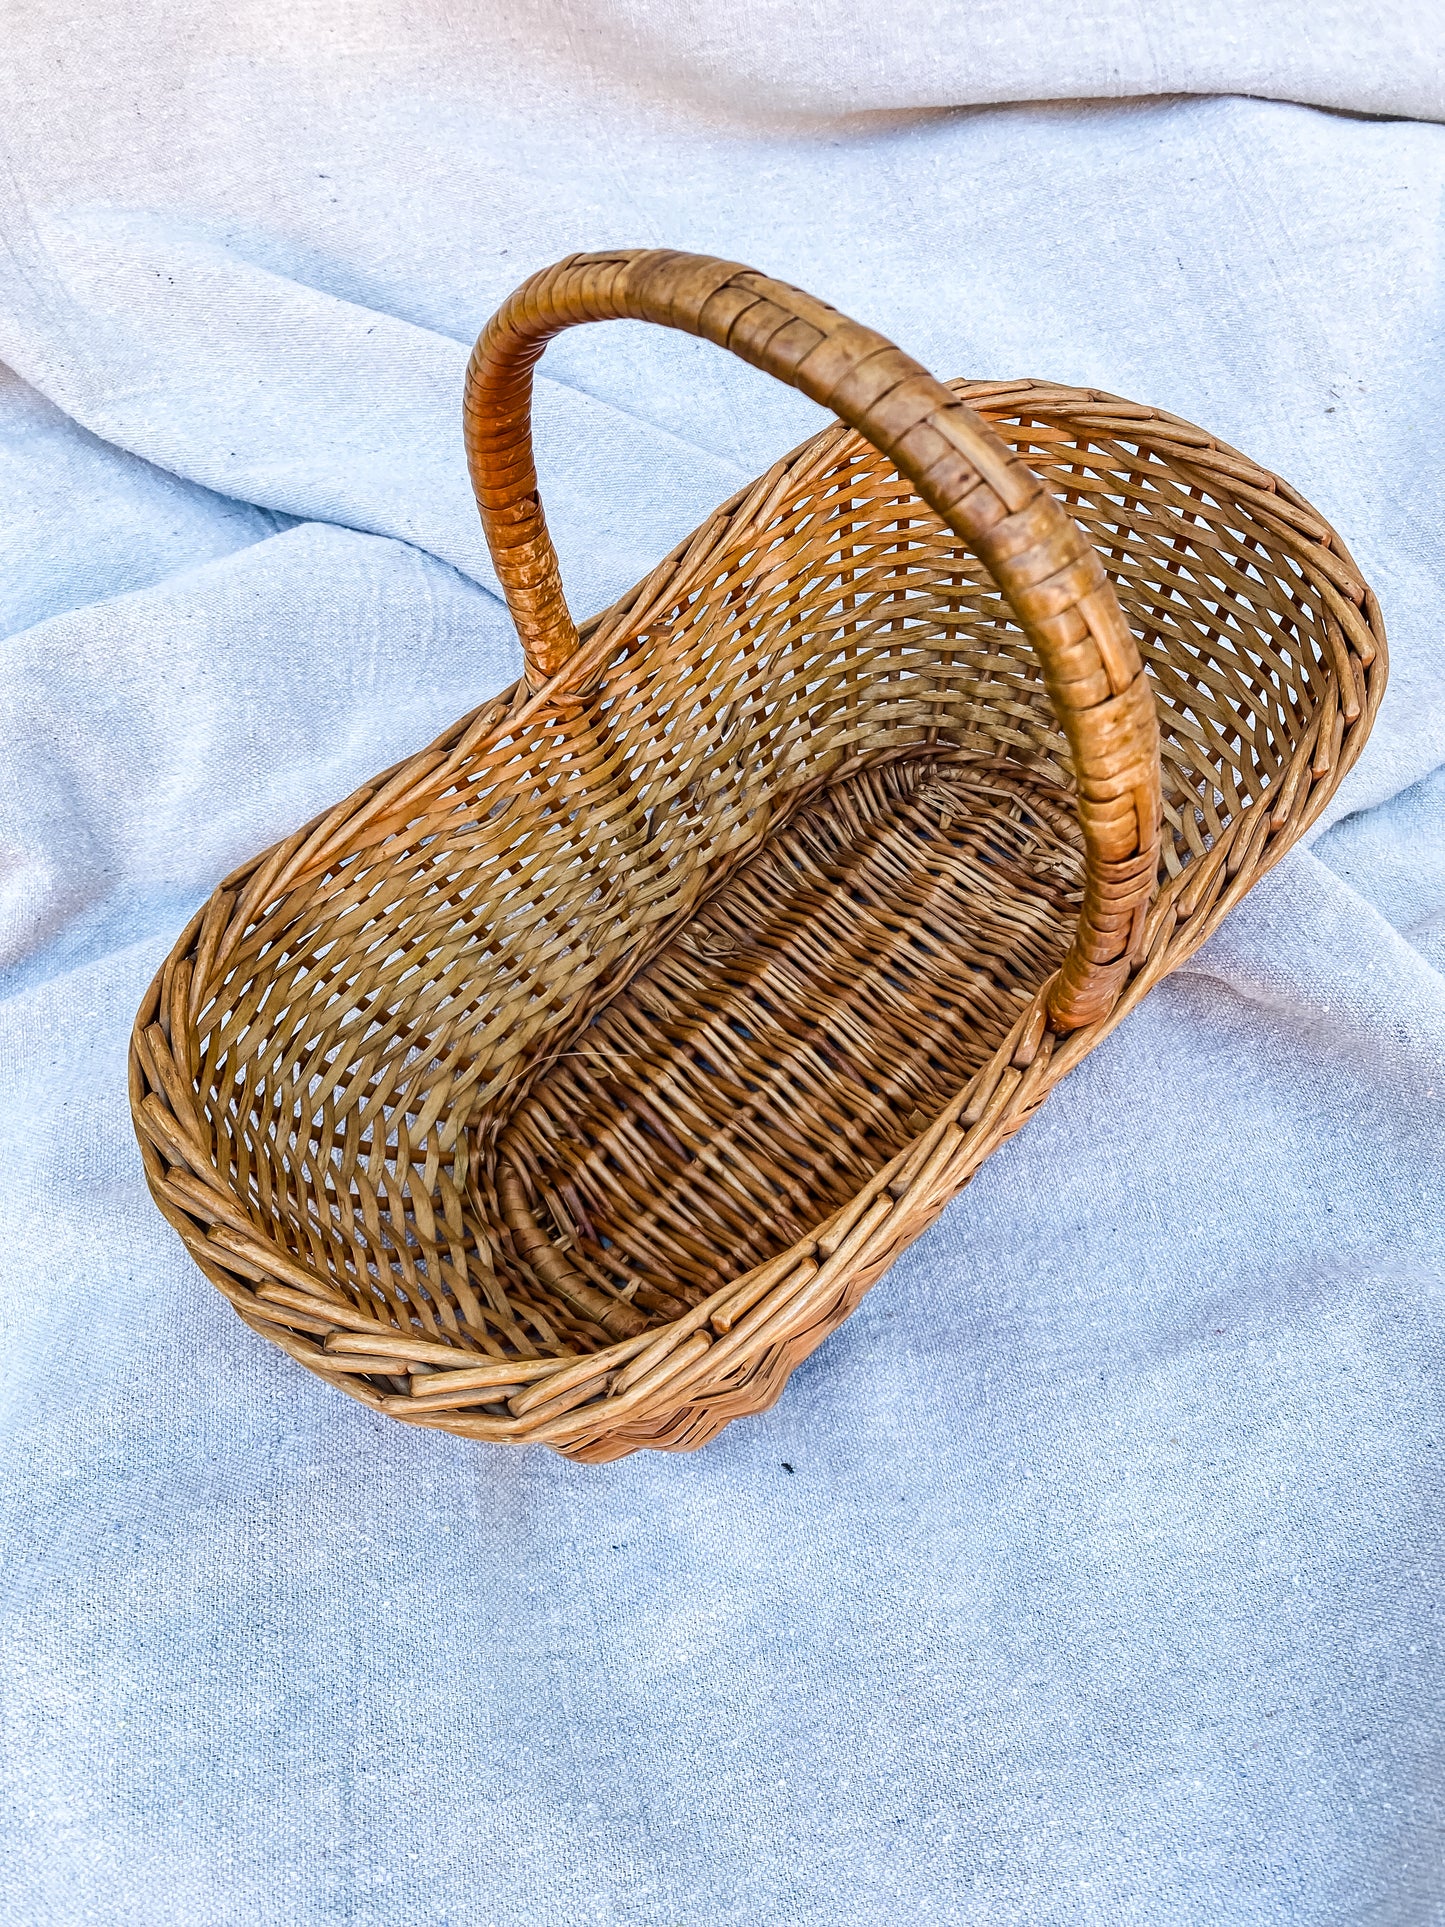 Oval Basket with Handle, c. 1960s